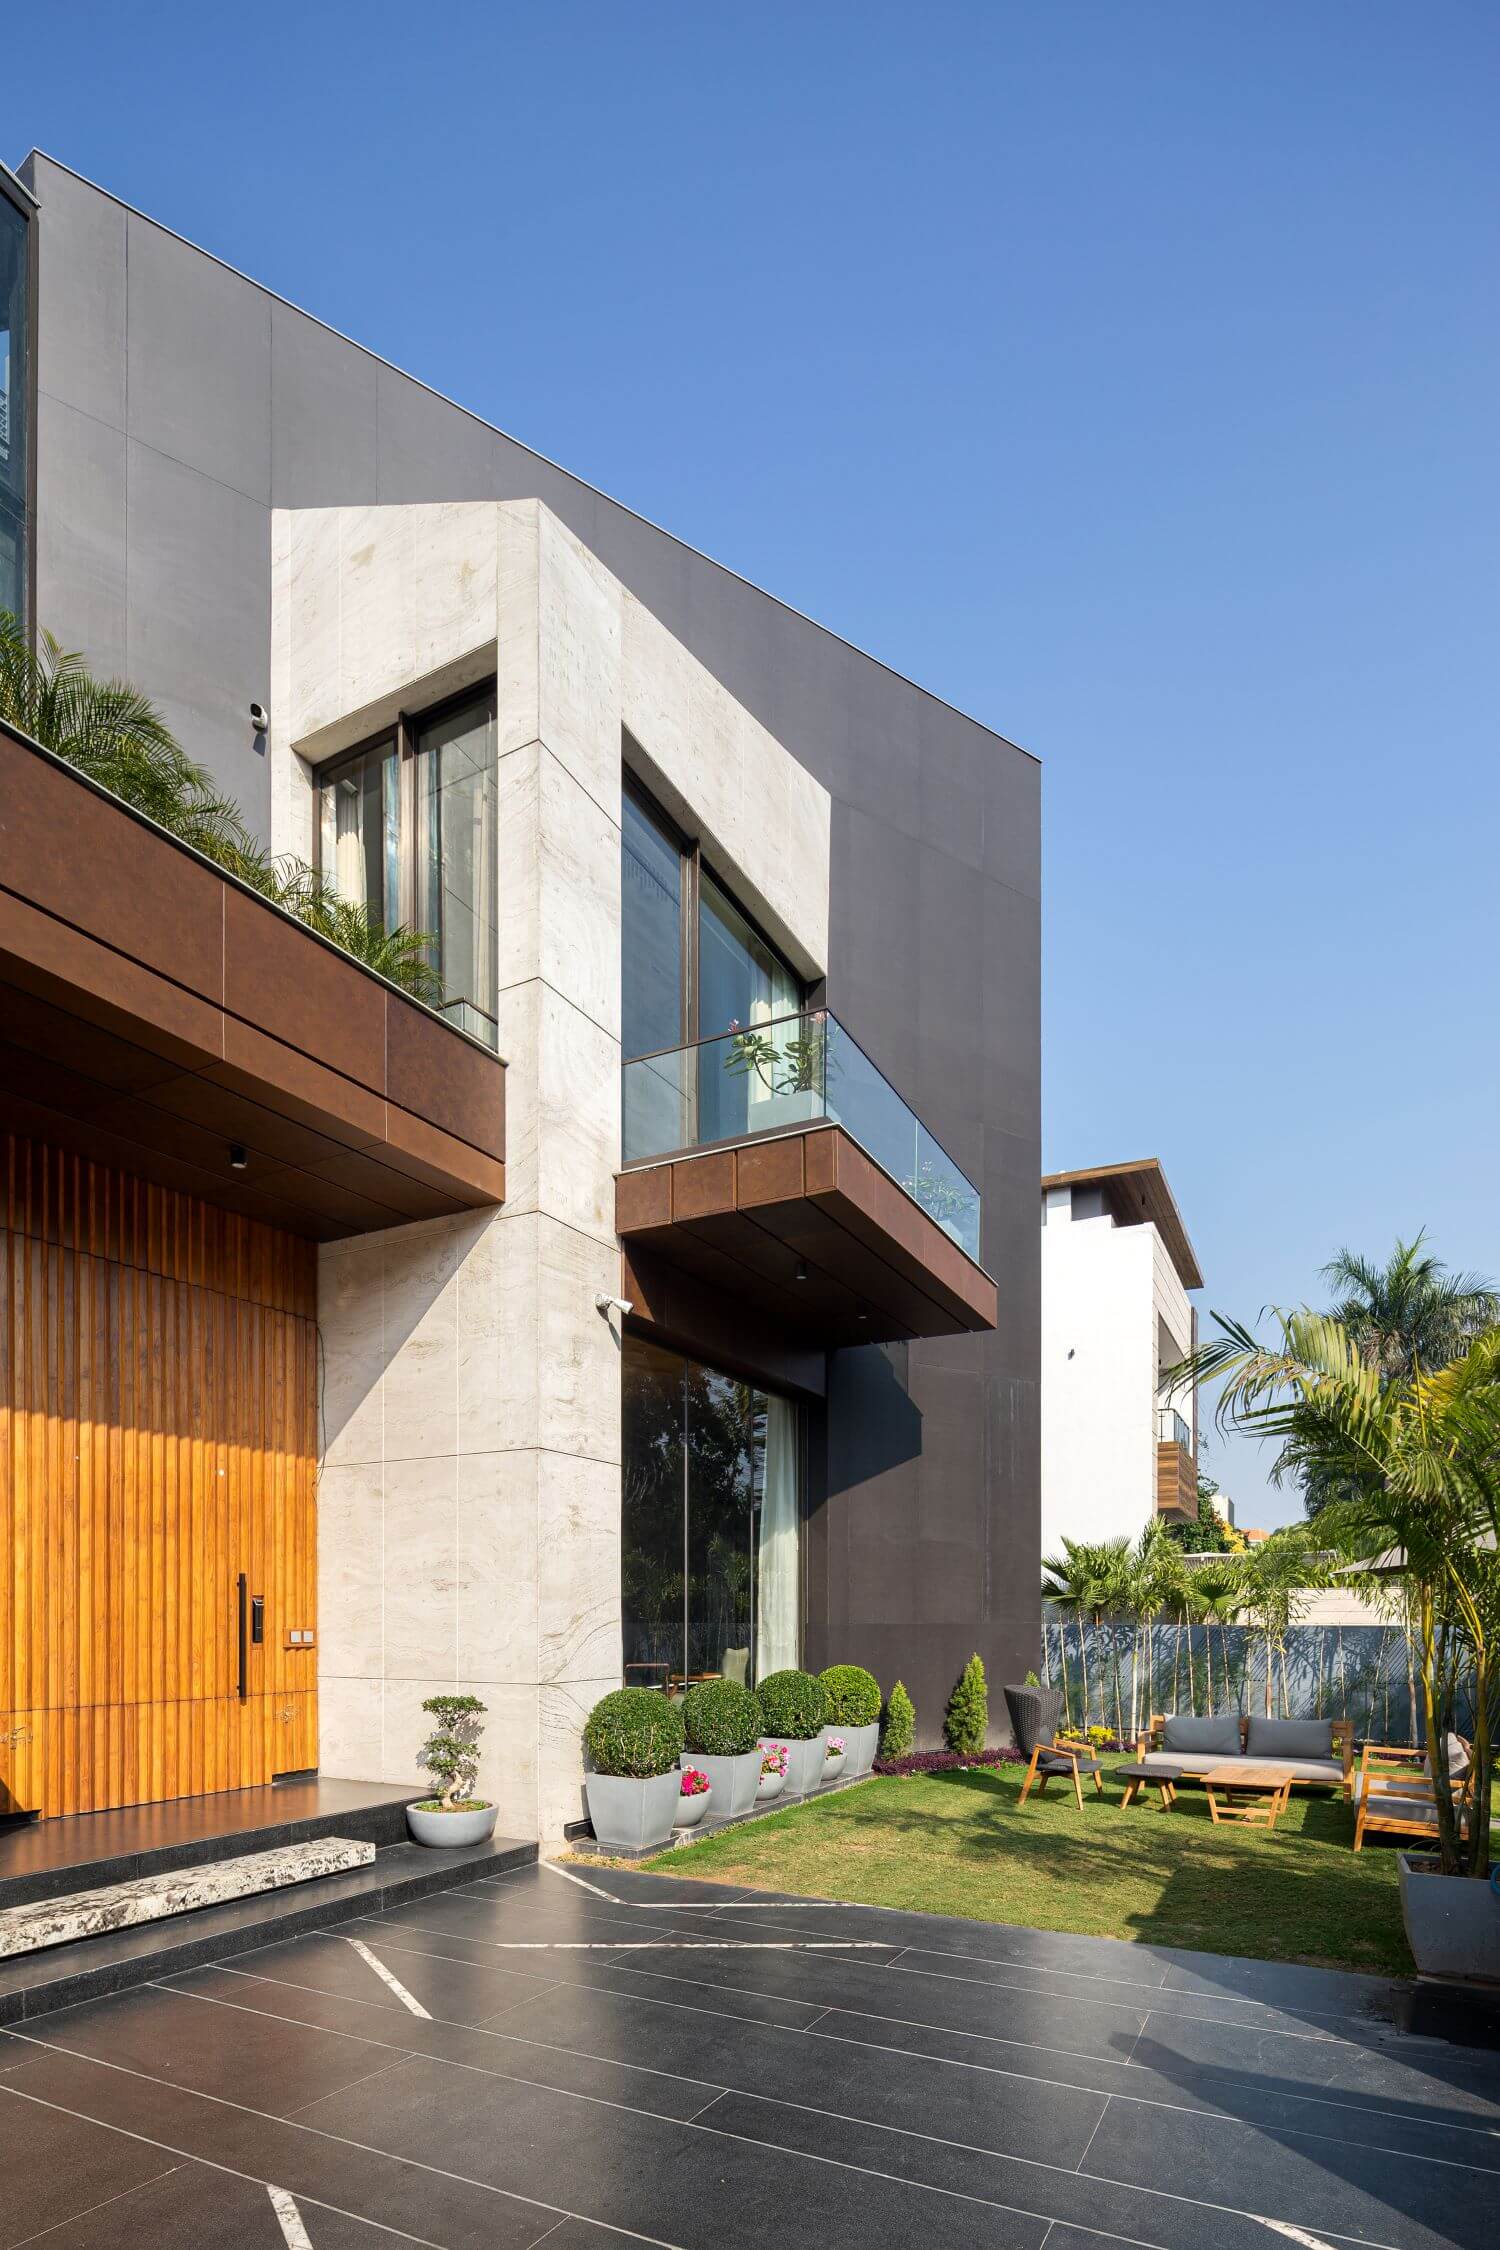 House 91/4 in Panchkula, India by Studio|Houses